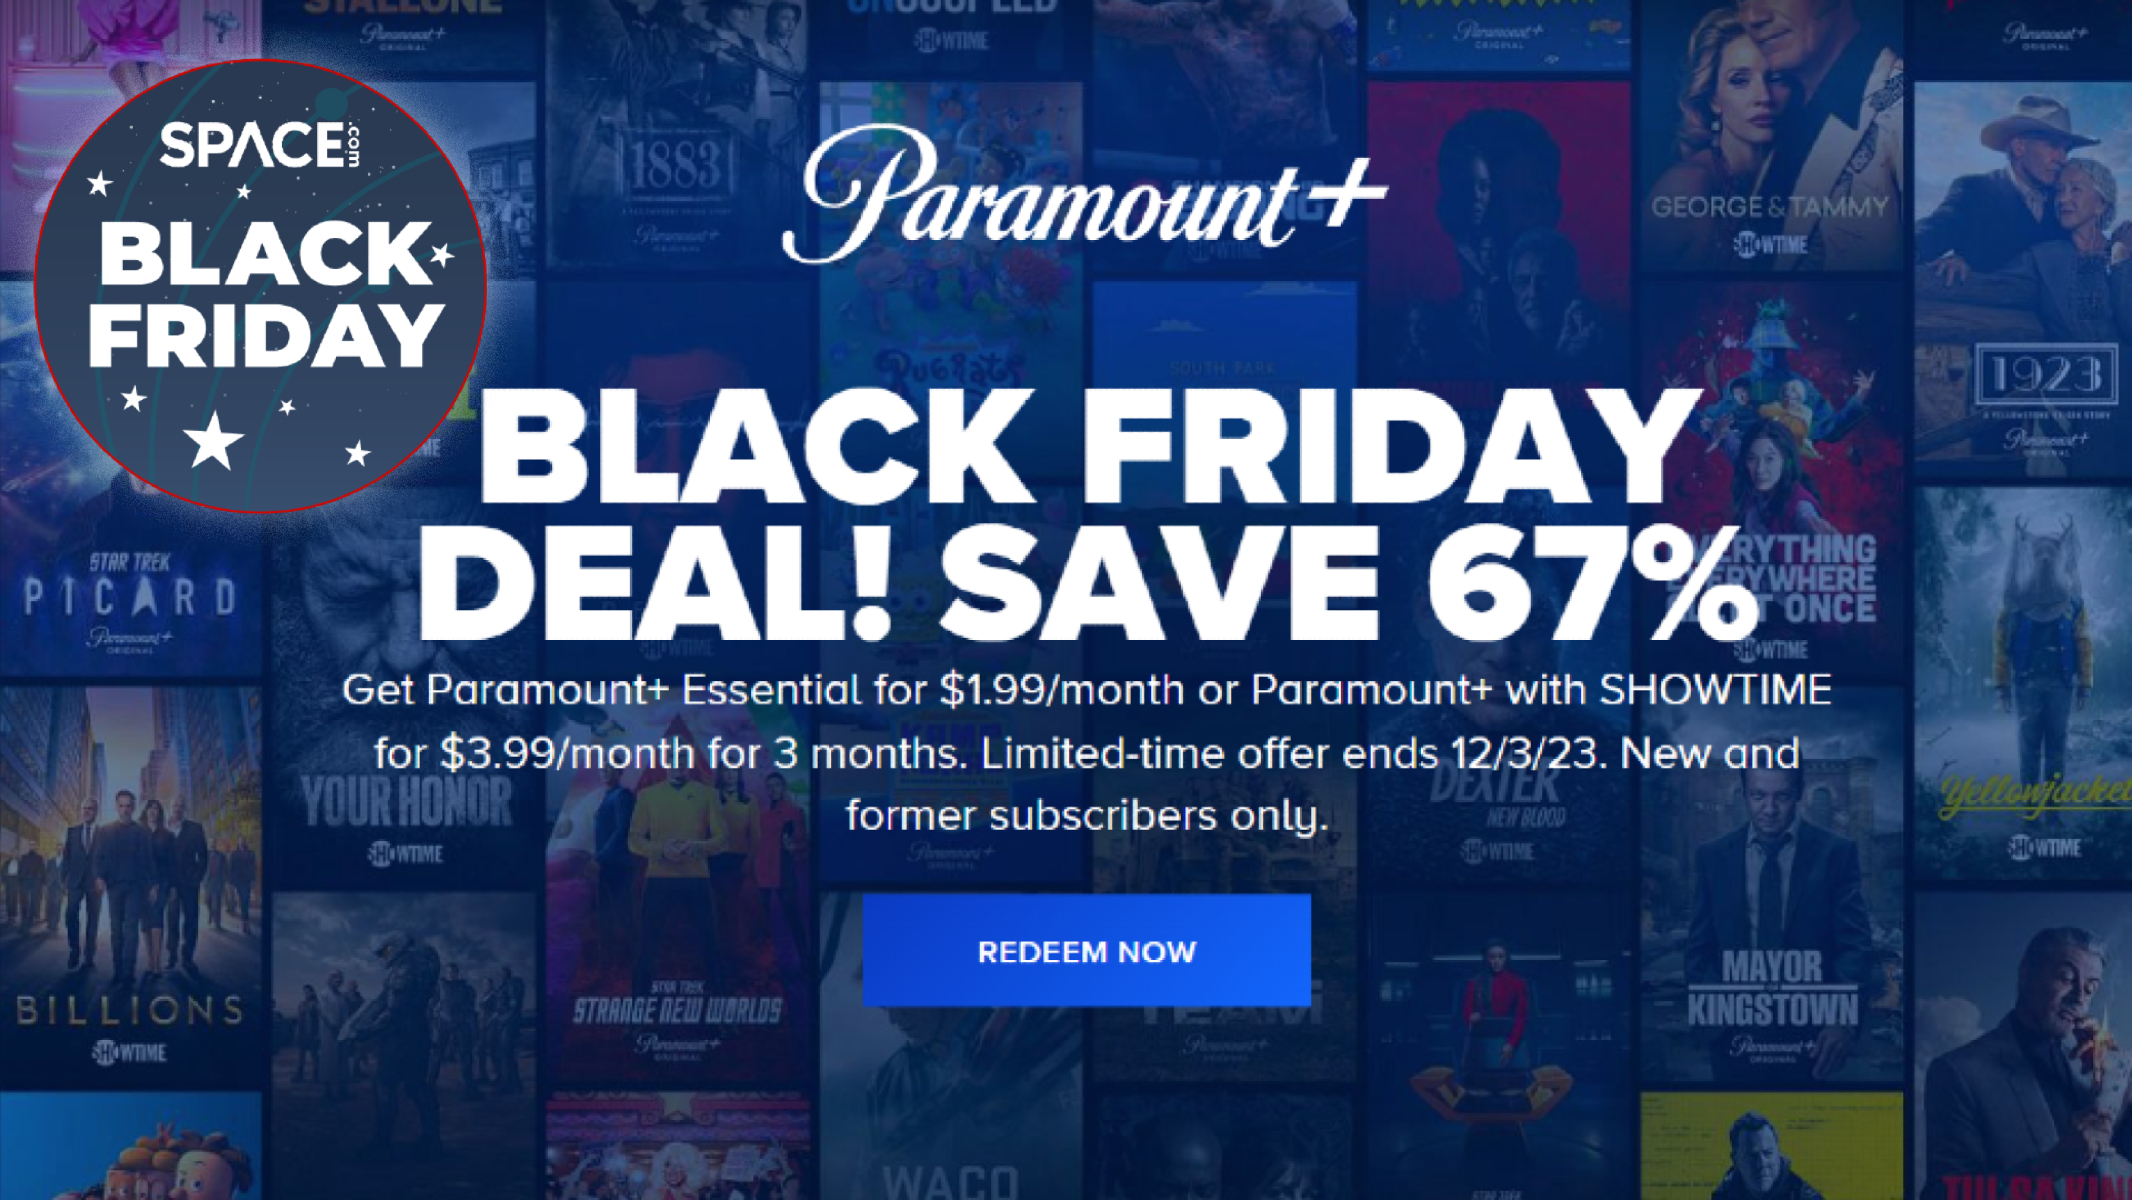 Watch all the Star Trek you want and save 67 on 3 months of Paramount